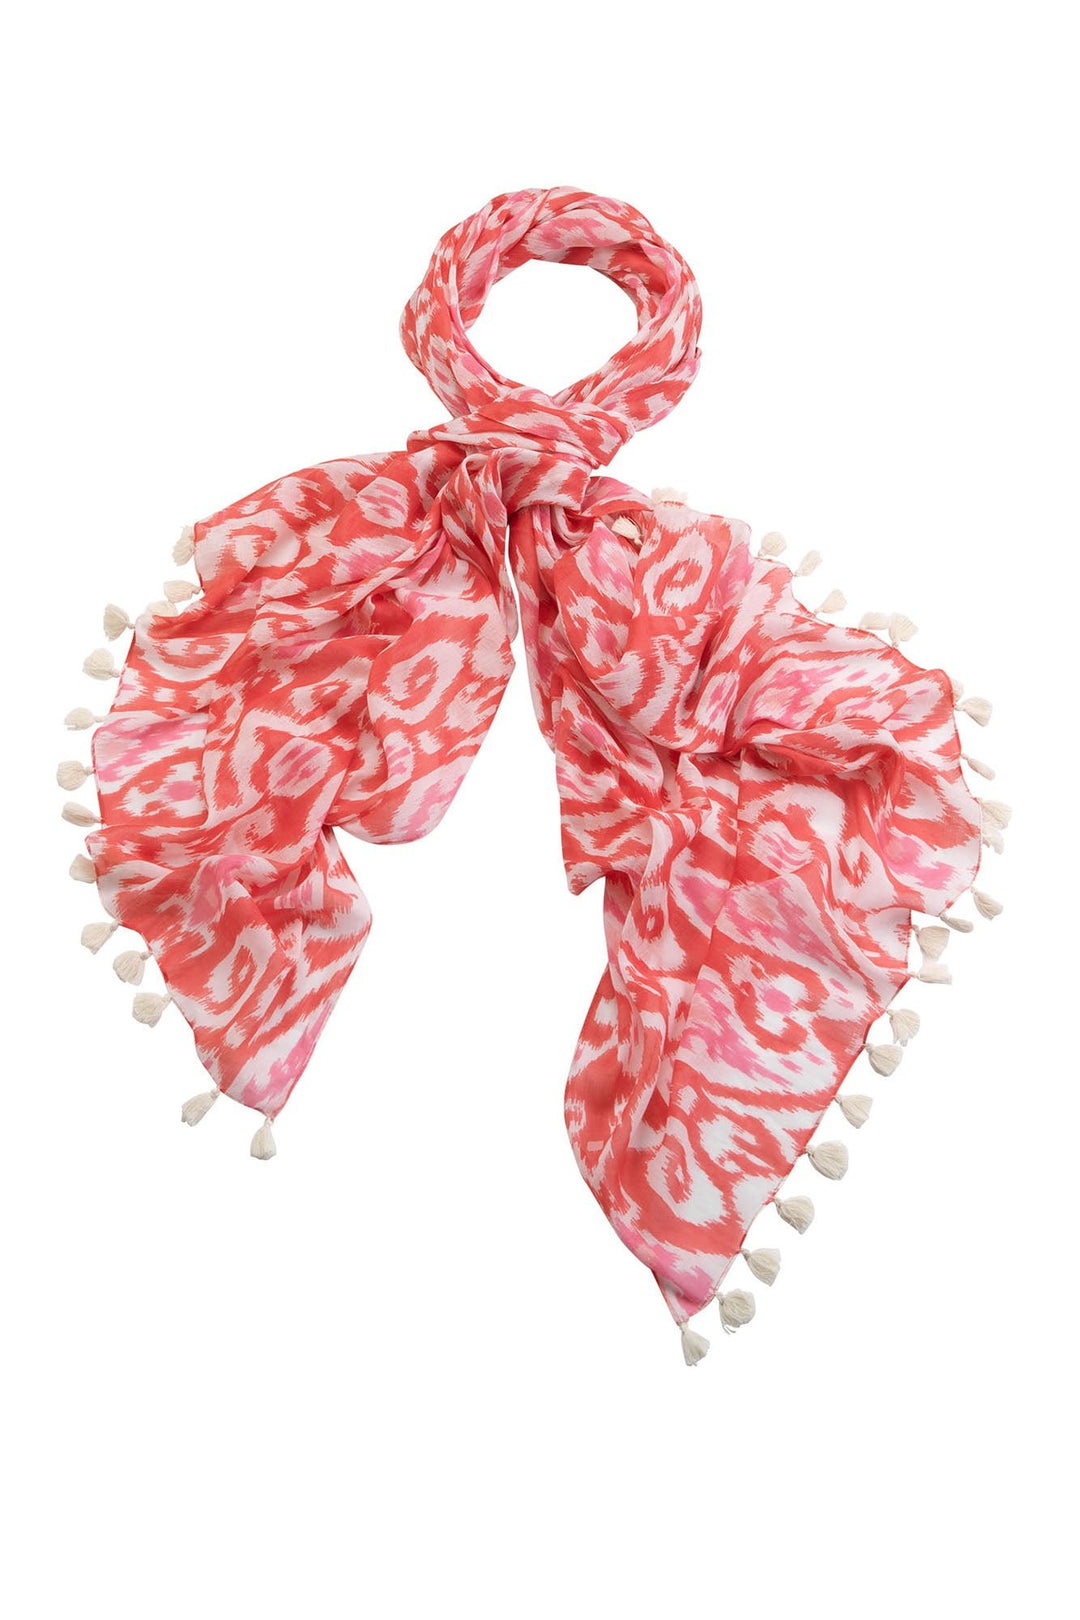 Ikat Pink Scarf with Tassels - One Hundred Stars